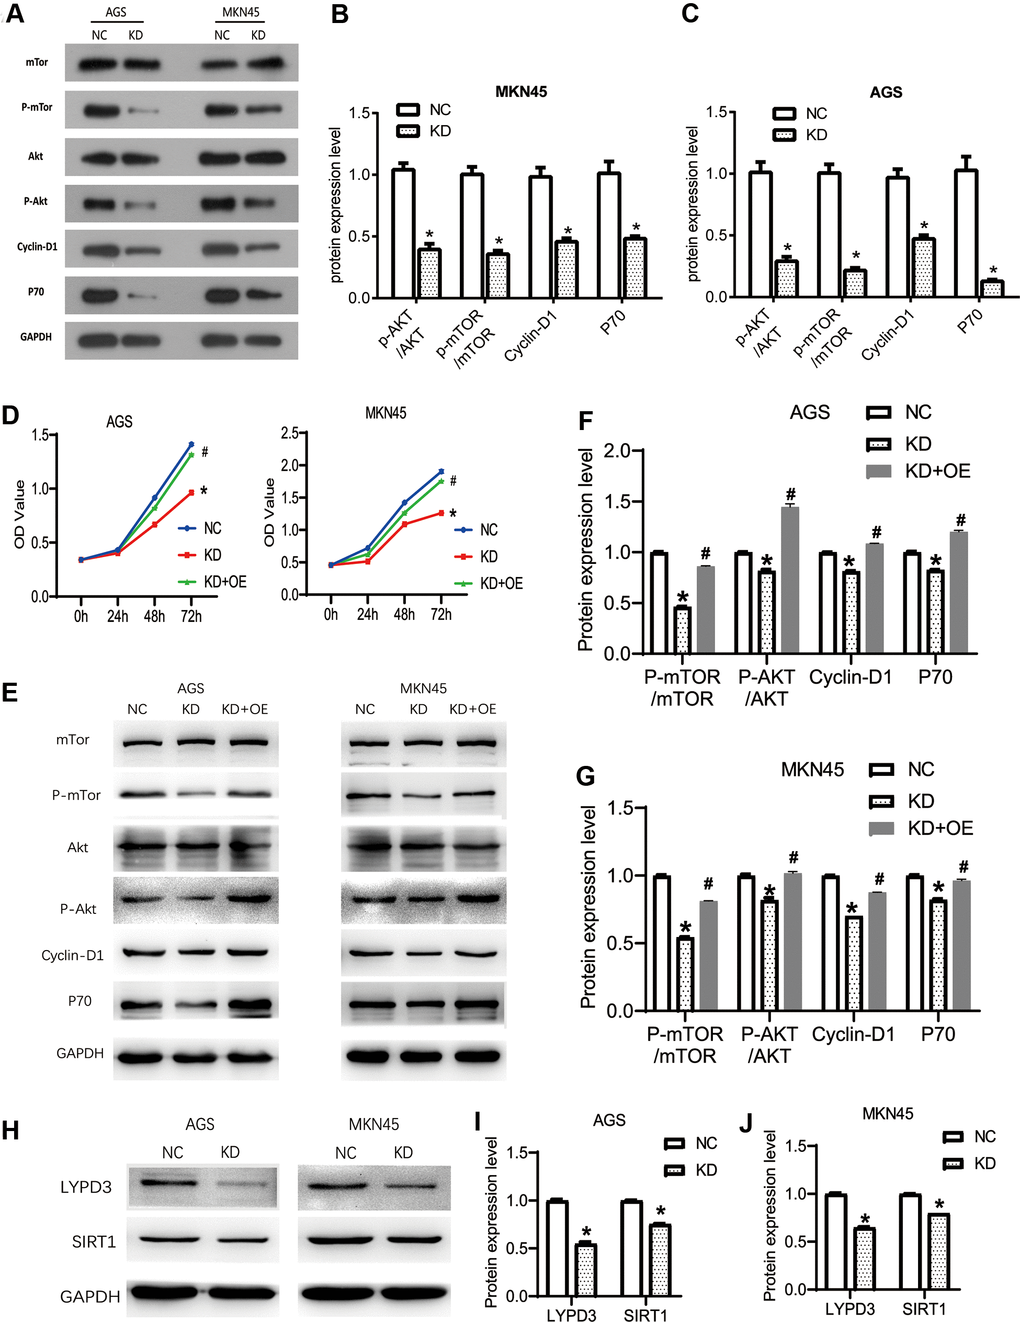 The knockdown of OGFRP1 inhibited tumor progression by activating the AKT/mTOR pathway in human gastric cancer cells. (A) The activities of AKT/mTOR pathway-related proteins were analyzed using western blot. Statistical analysis of protein expression levels in MKN45 (B) and AGS (C) cells were performed using the t-test. (D) OGFRP1 overexpression plasmid was transfected into OGFRP1 knockdown cells (KD+OE group). CCK8 was performed to detect the proliferation of MKN45 and AGS cells. (E) The levels of AKT/mTOR pathway-related proteins were detected by western blot in AGS (F) and MKN45 (G) cells. (H) The expression levels of LYPD3 and SIRT1 were detected by western blot in AGS (I) and MKN45 (J) cells. *P